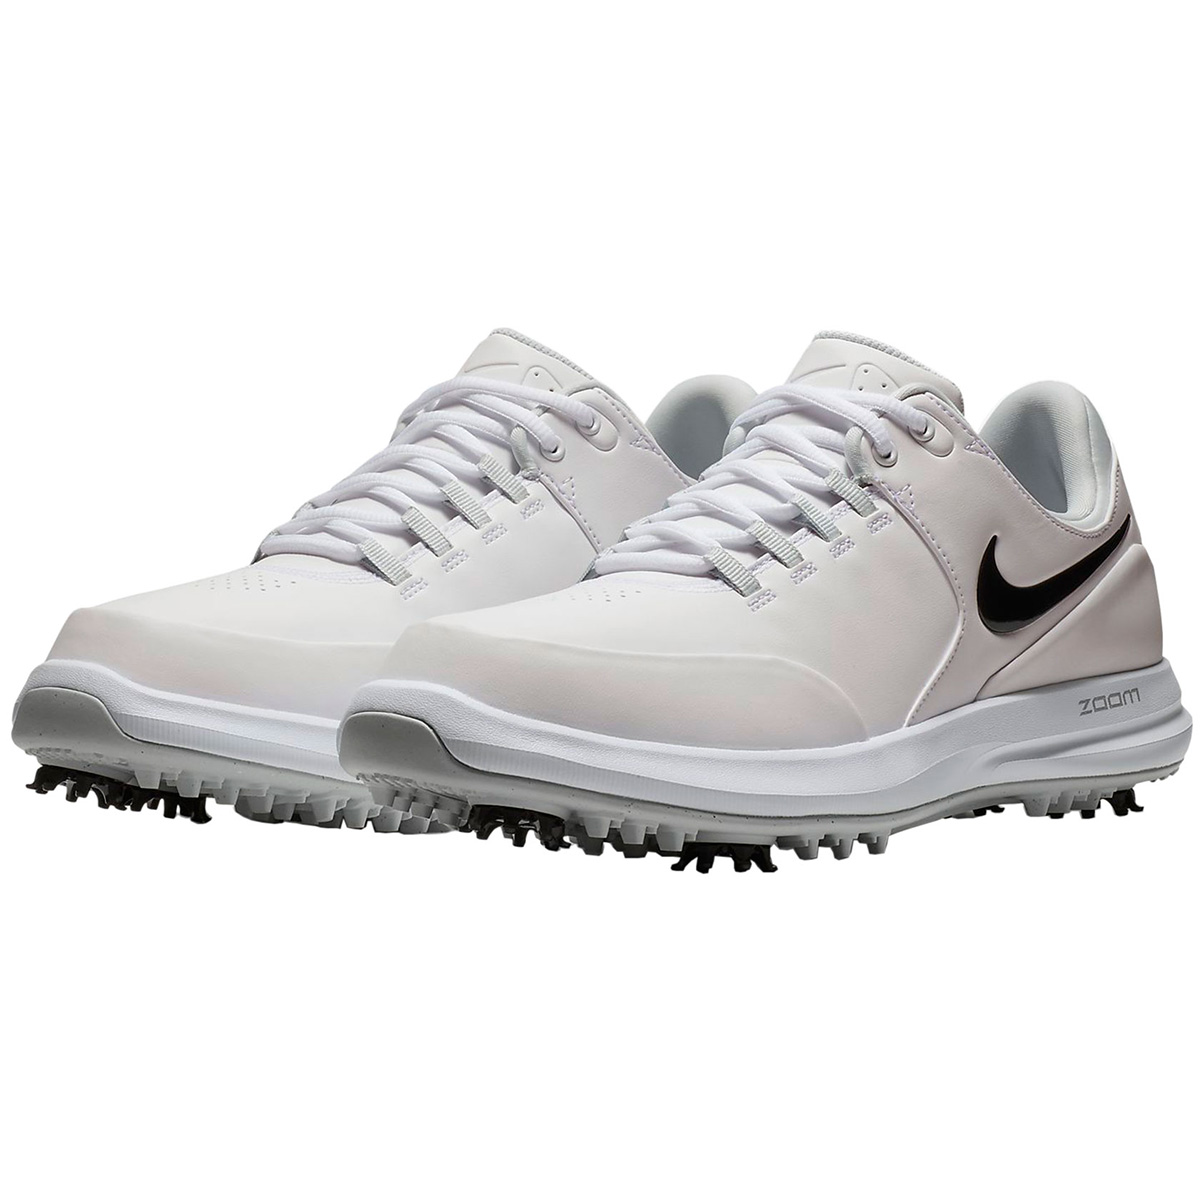 Nike Golf Air Zoom Accurate Shoes | Online Golf الوان زيتية جرير